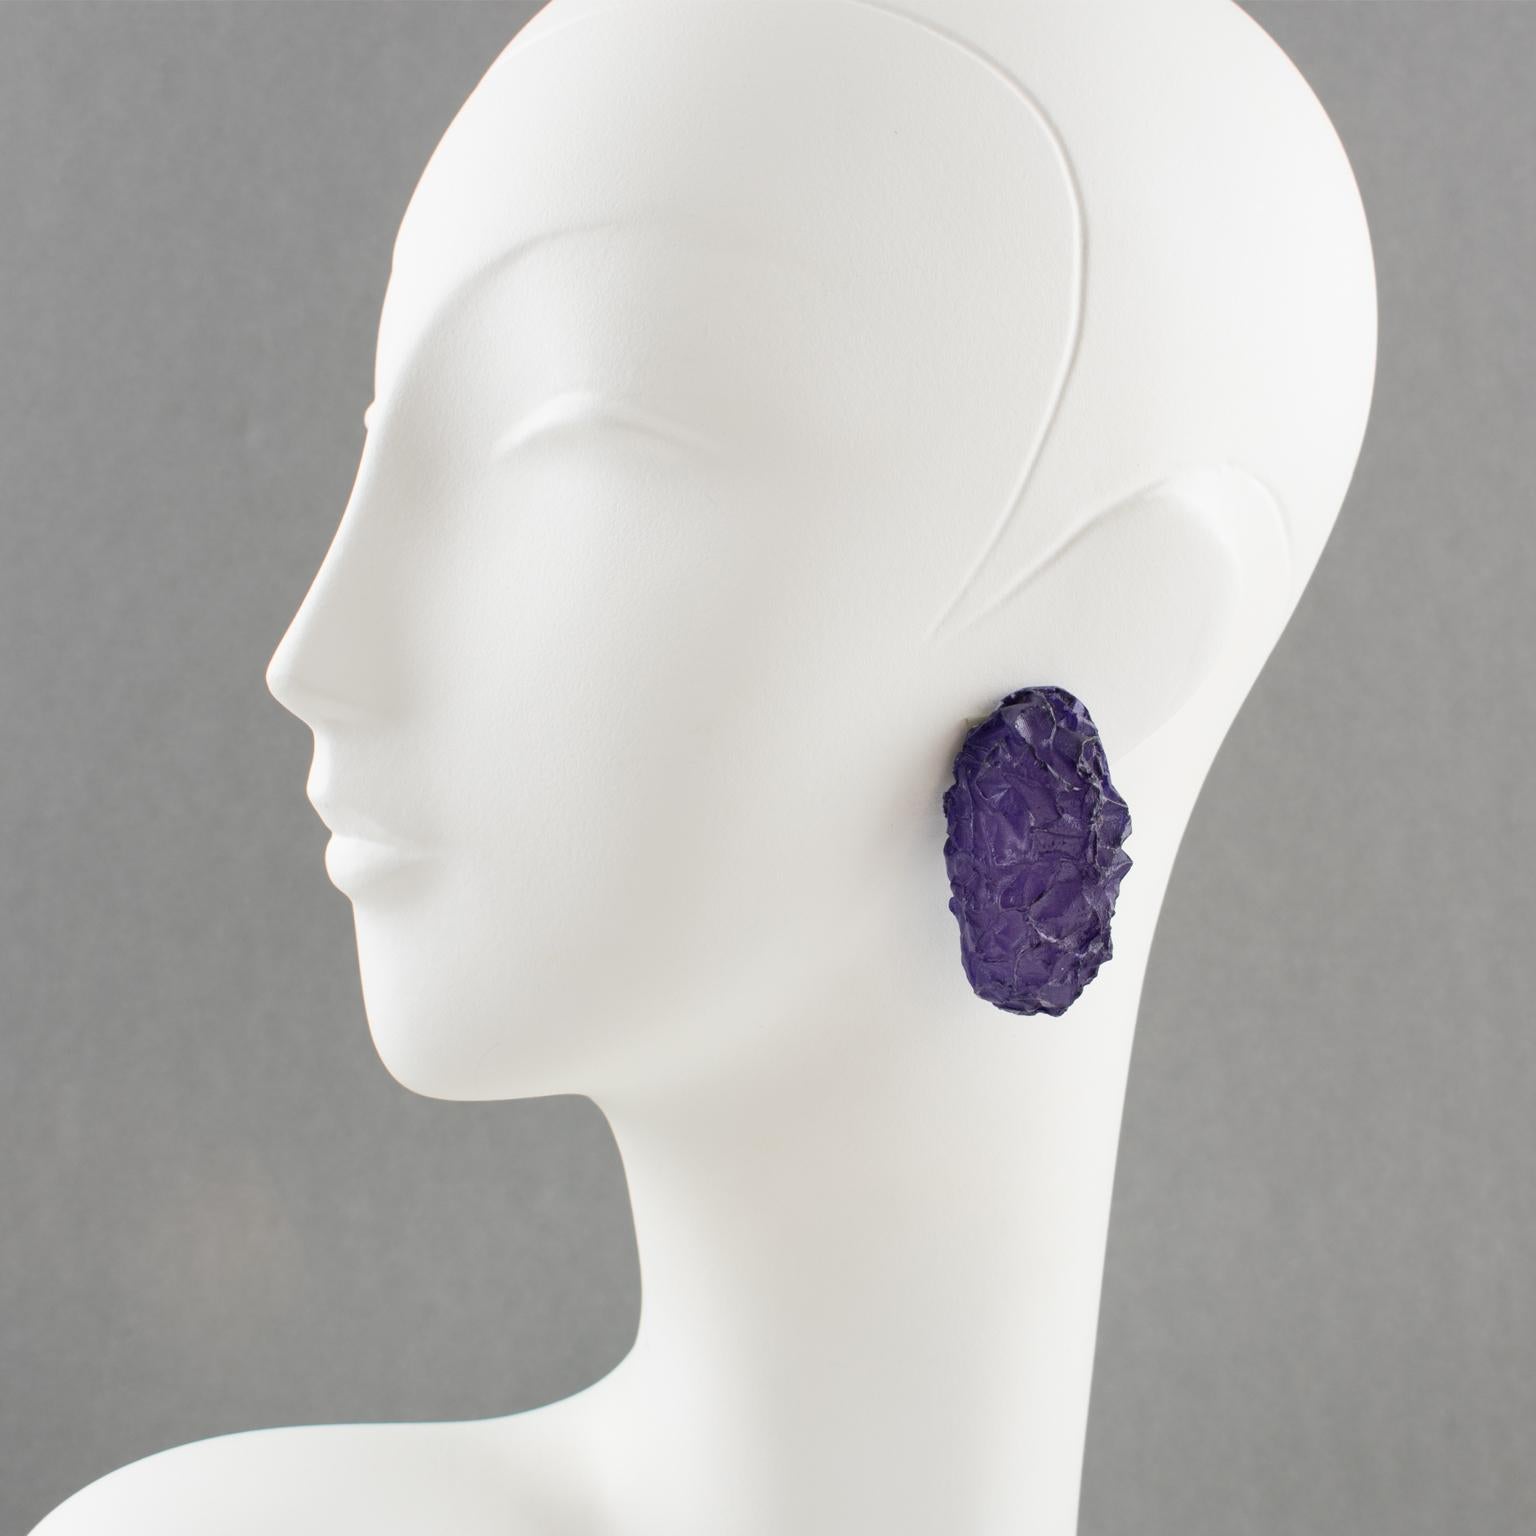 Stylish oversized carved Lucite or resin clip-on earrings from an Italian design studio. Dimensional ovoid shape with rock carving in frosted deep purple color, textured surface with wrinkles. Very unusual shape. No visible maker's